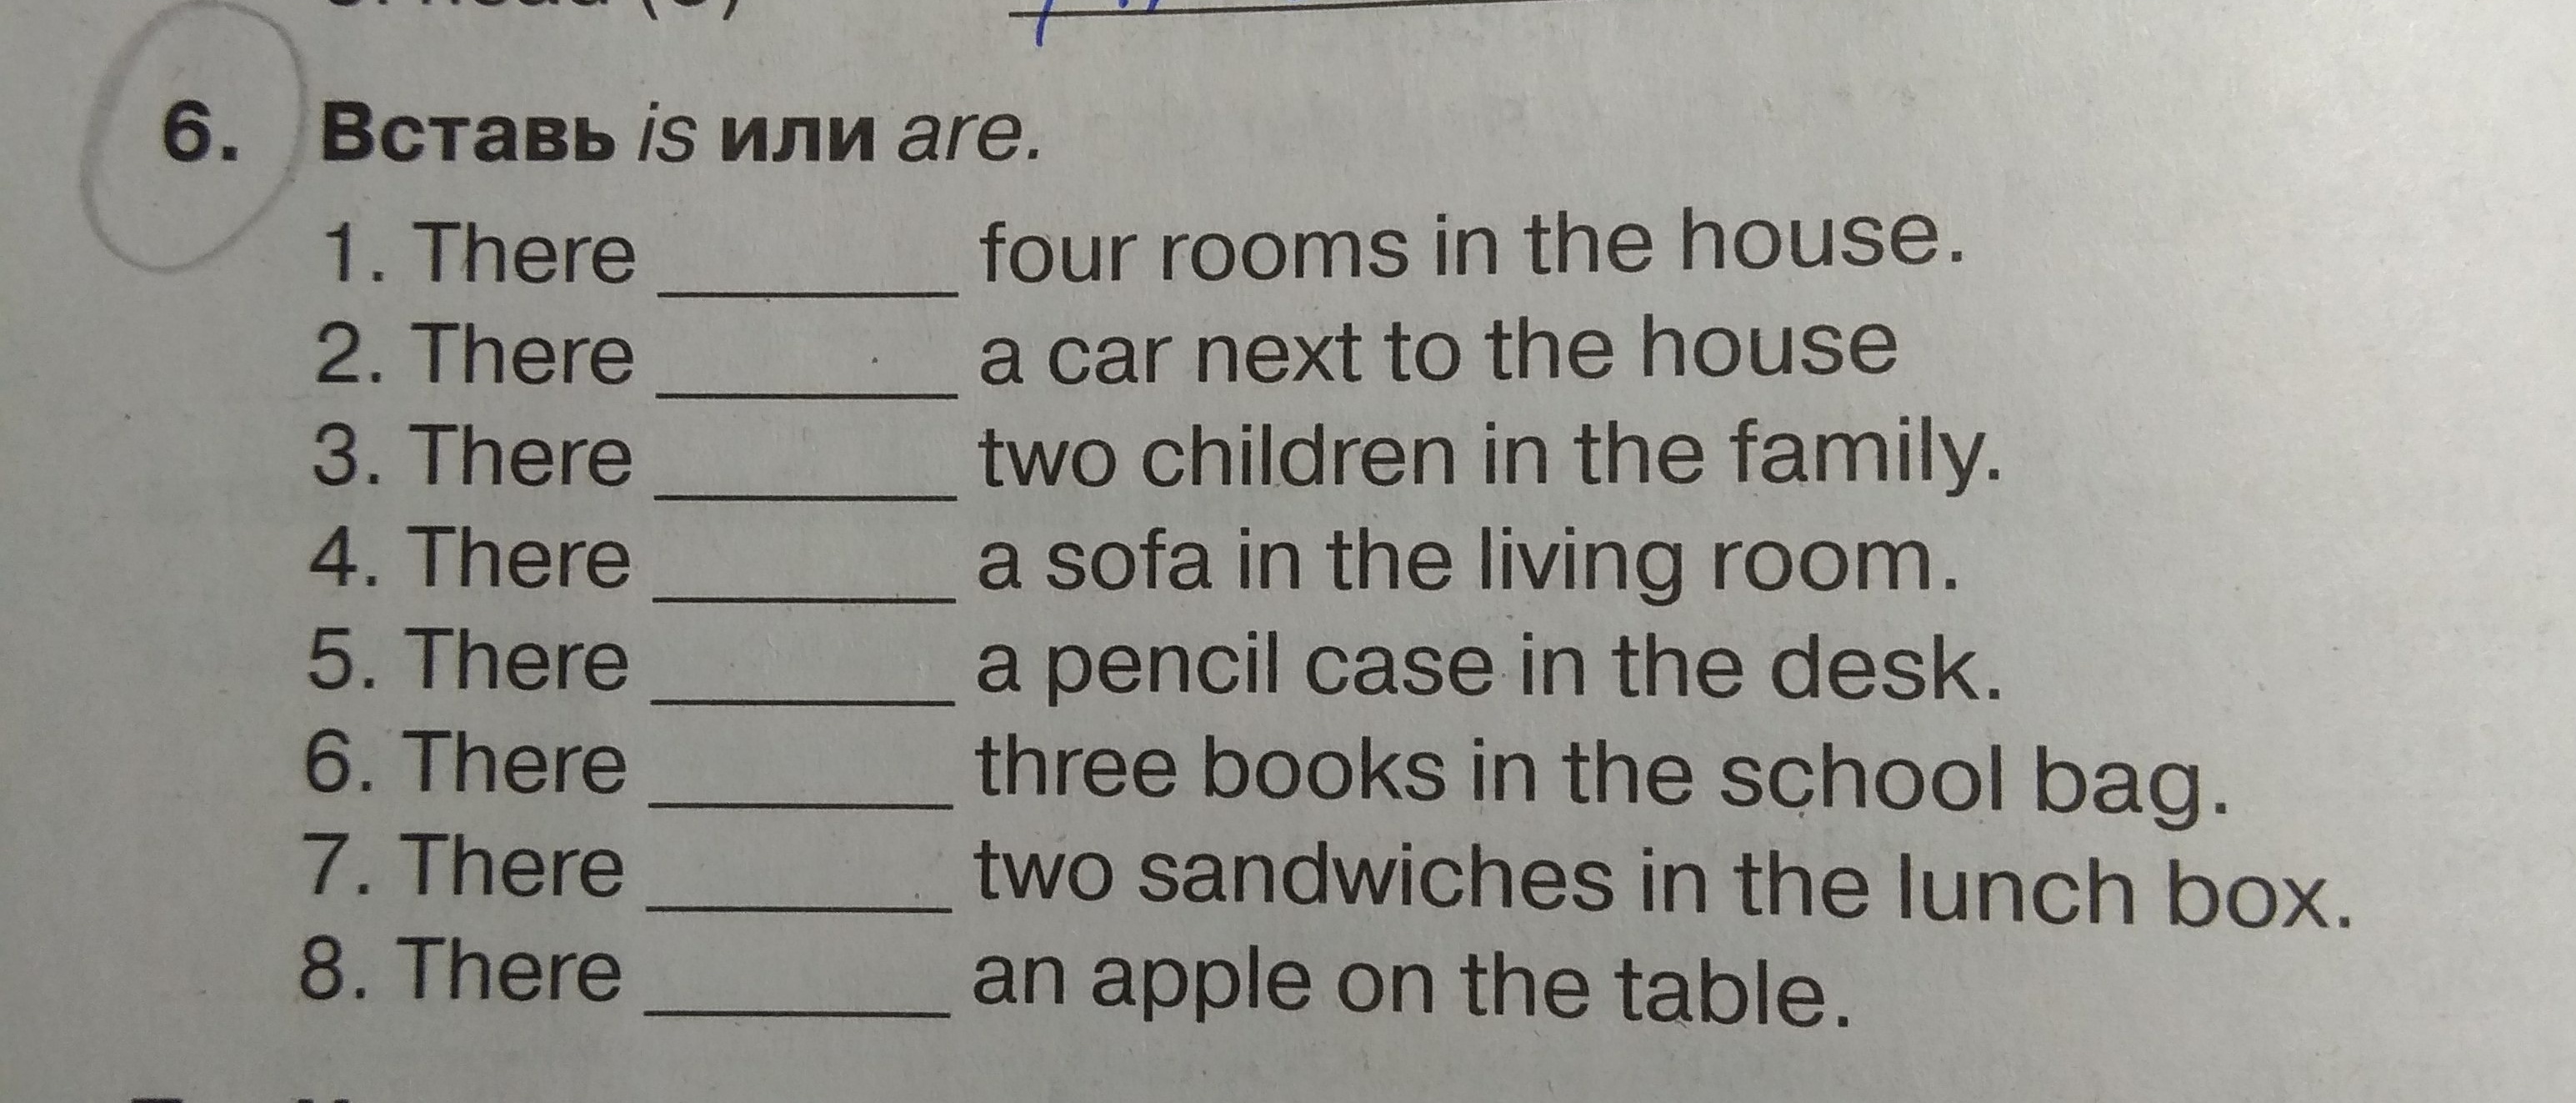 News is или are. Вставить is или are. Вставь is или are there four Rooms in the. Clothes is или are.